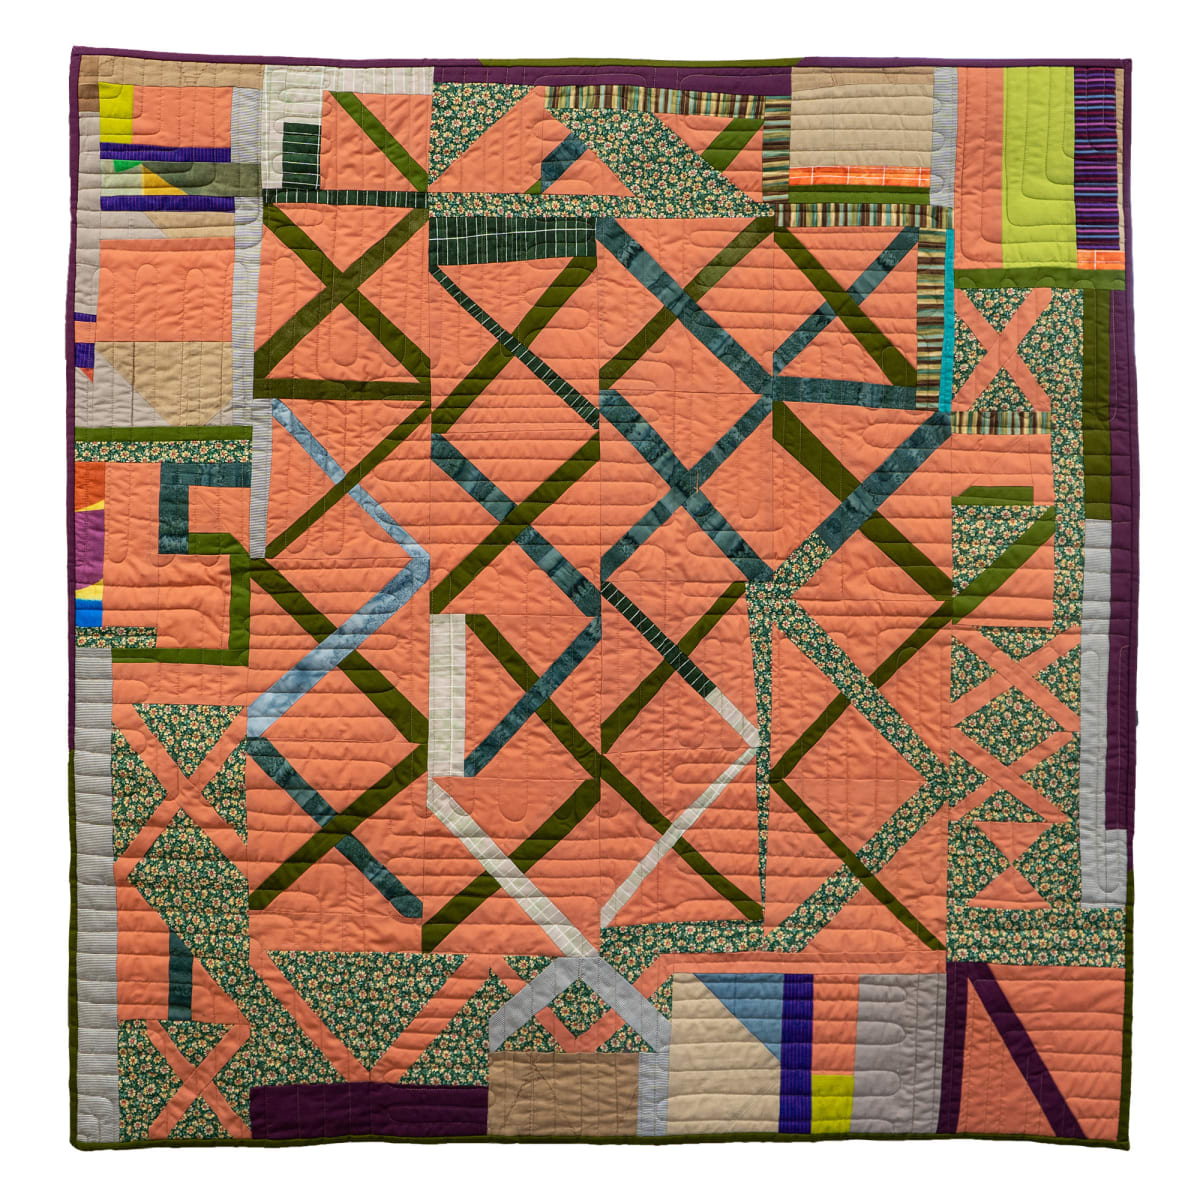 Family Triage III: Garden Plots by Sarah Atlee  Image: Repurposed 1984 quilt, quilting cotton. Machine pieced and quilted. 40 x 40 inches, 2022. Comes with hanging sleeve. Functional or wall-hanging quilt - safe for washer and dryer.